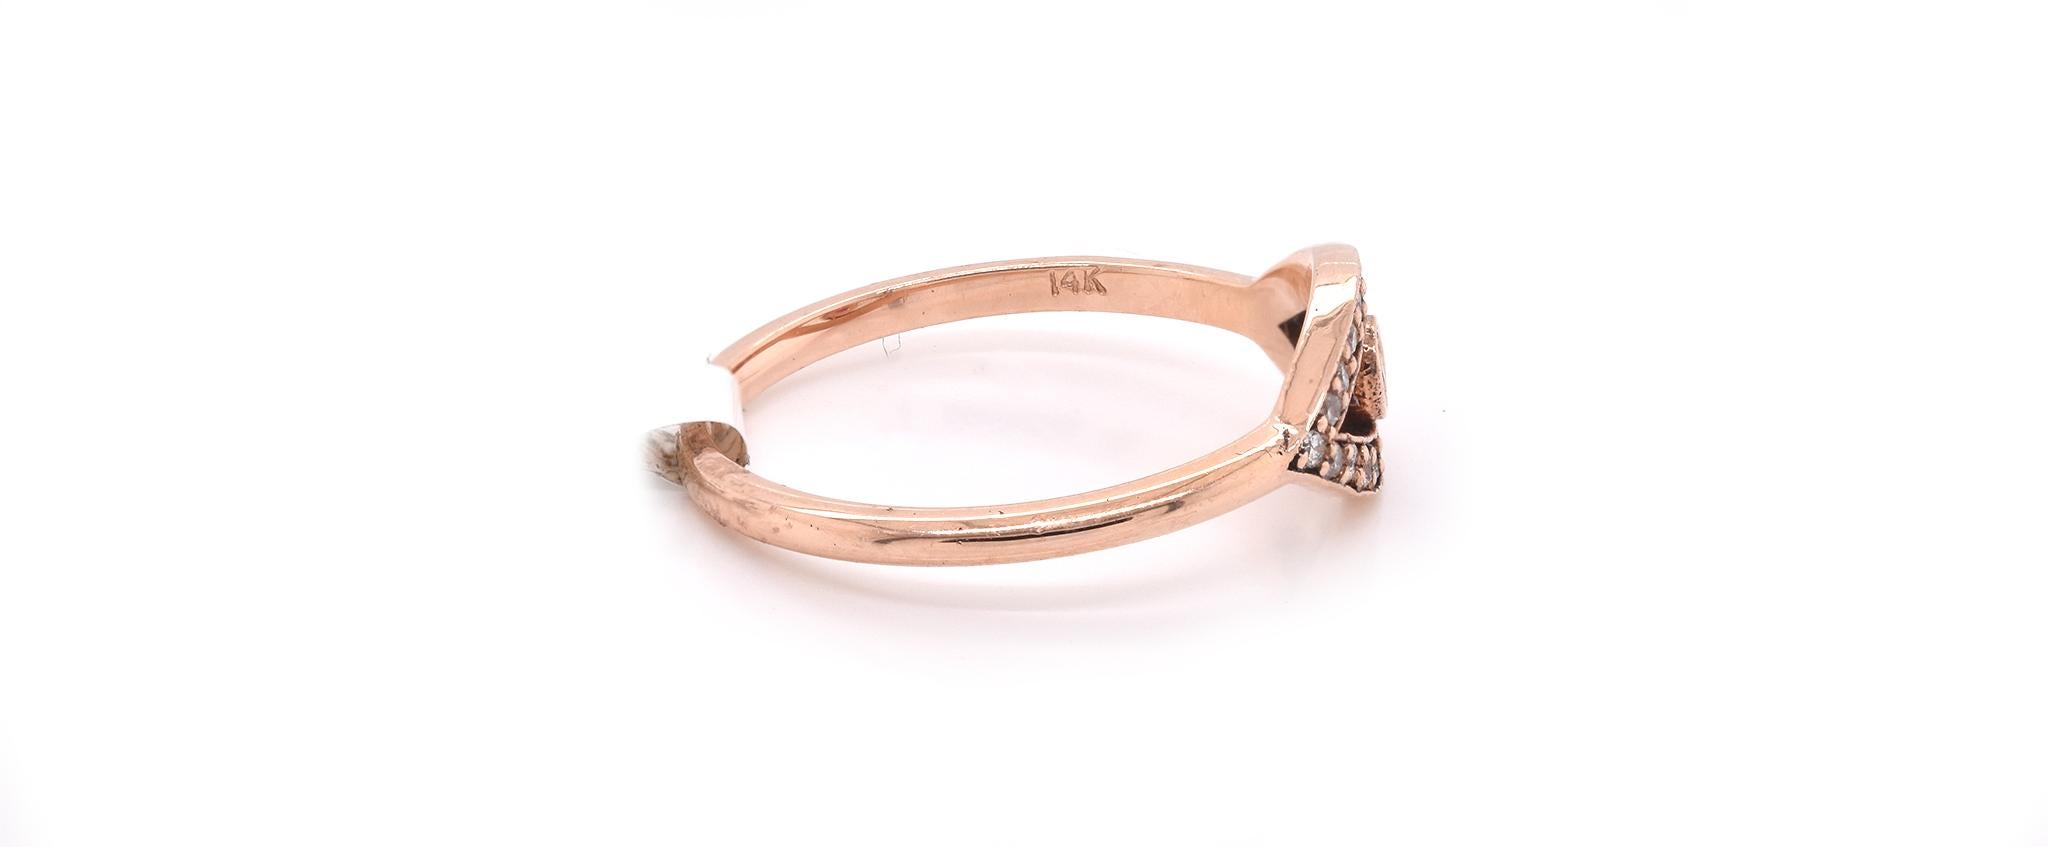 Designer: Custom Design
Material: 14k rose gold
Center Stone: 1 round cut ruby 
Diamonds: 20 round brilliant cuts = 0.13cttw 
Ring size: 6 ½ (please allow two additional shipping days for sizing requests)
Dimensions: ring top measures 6.95mm x 13mm